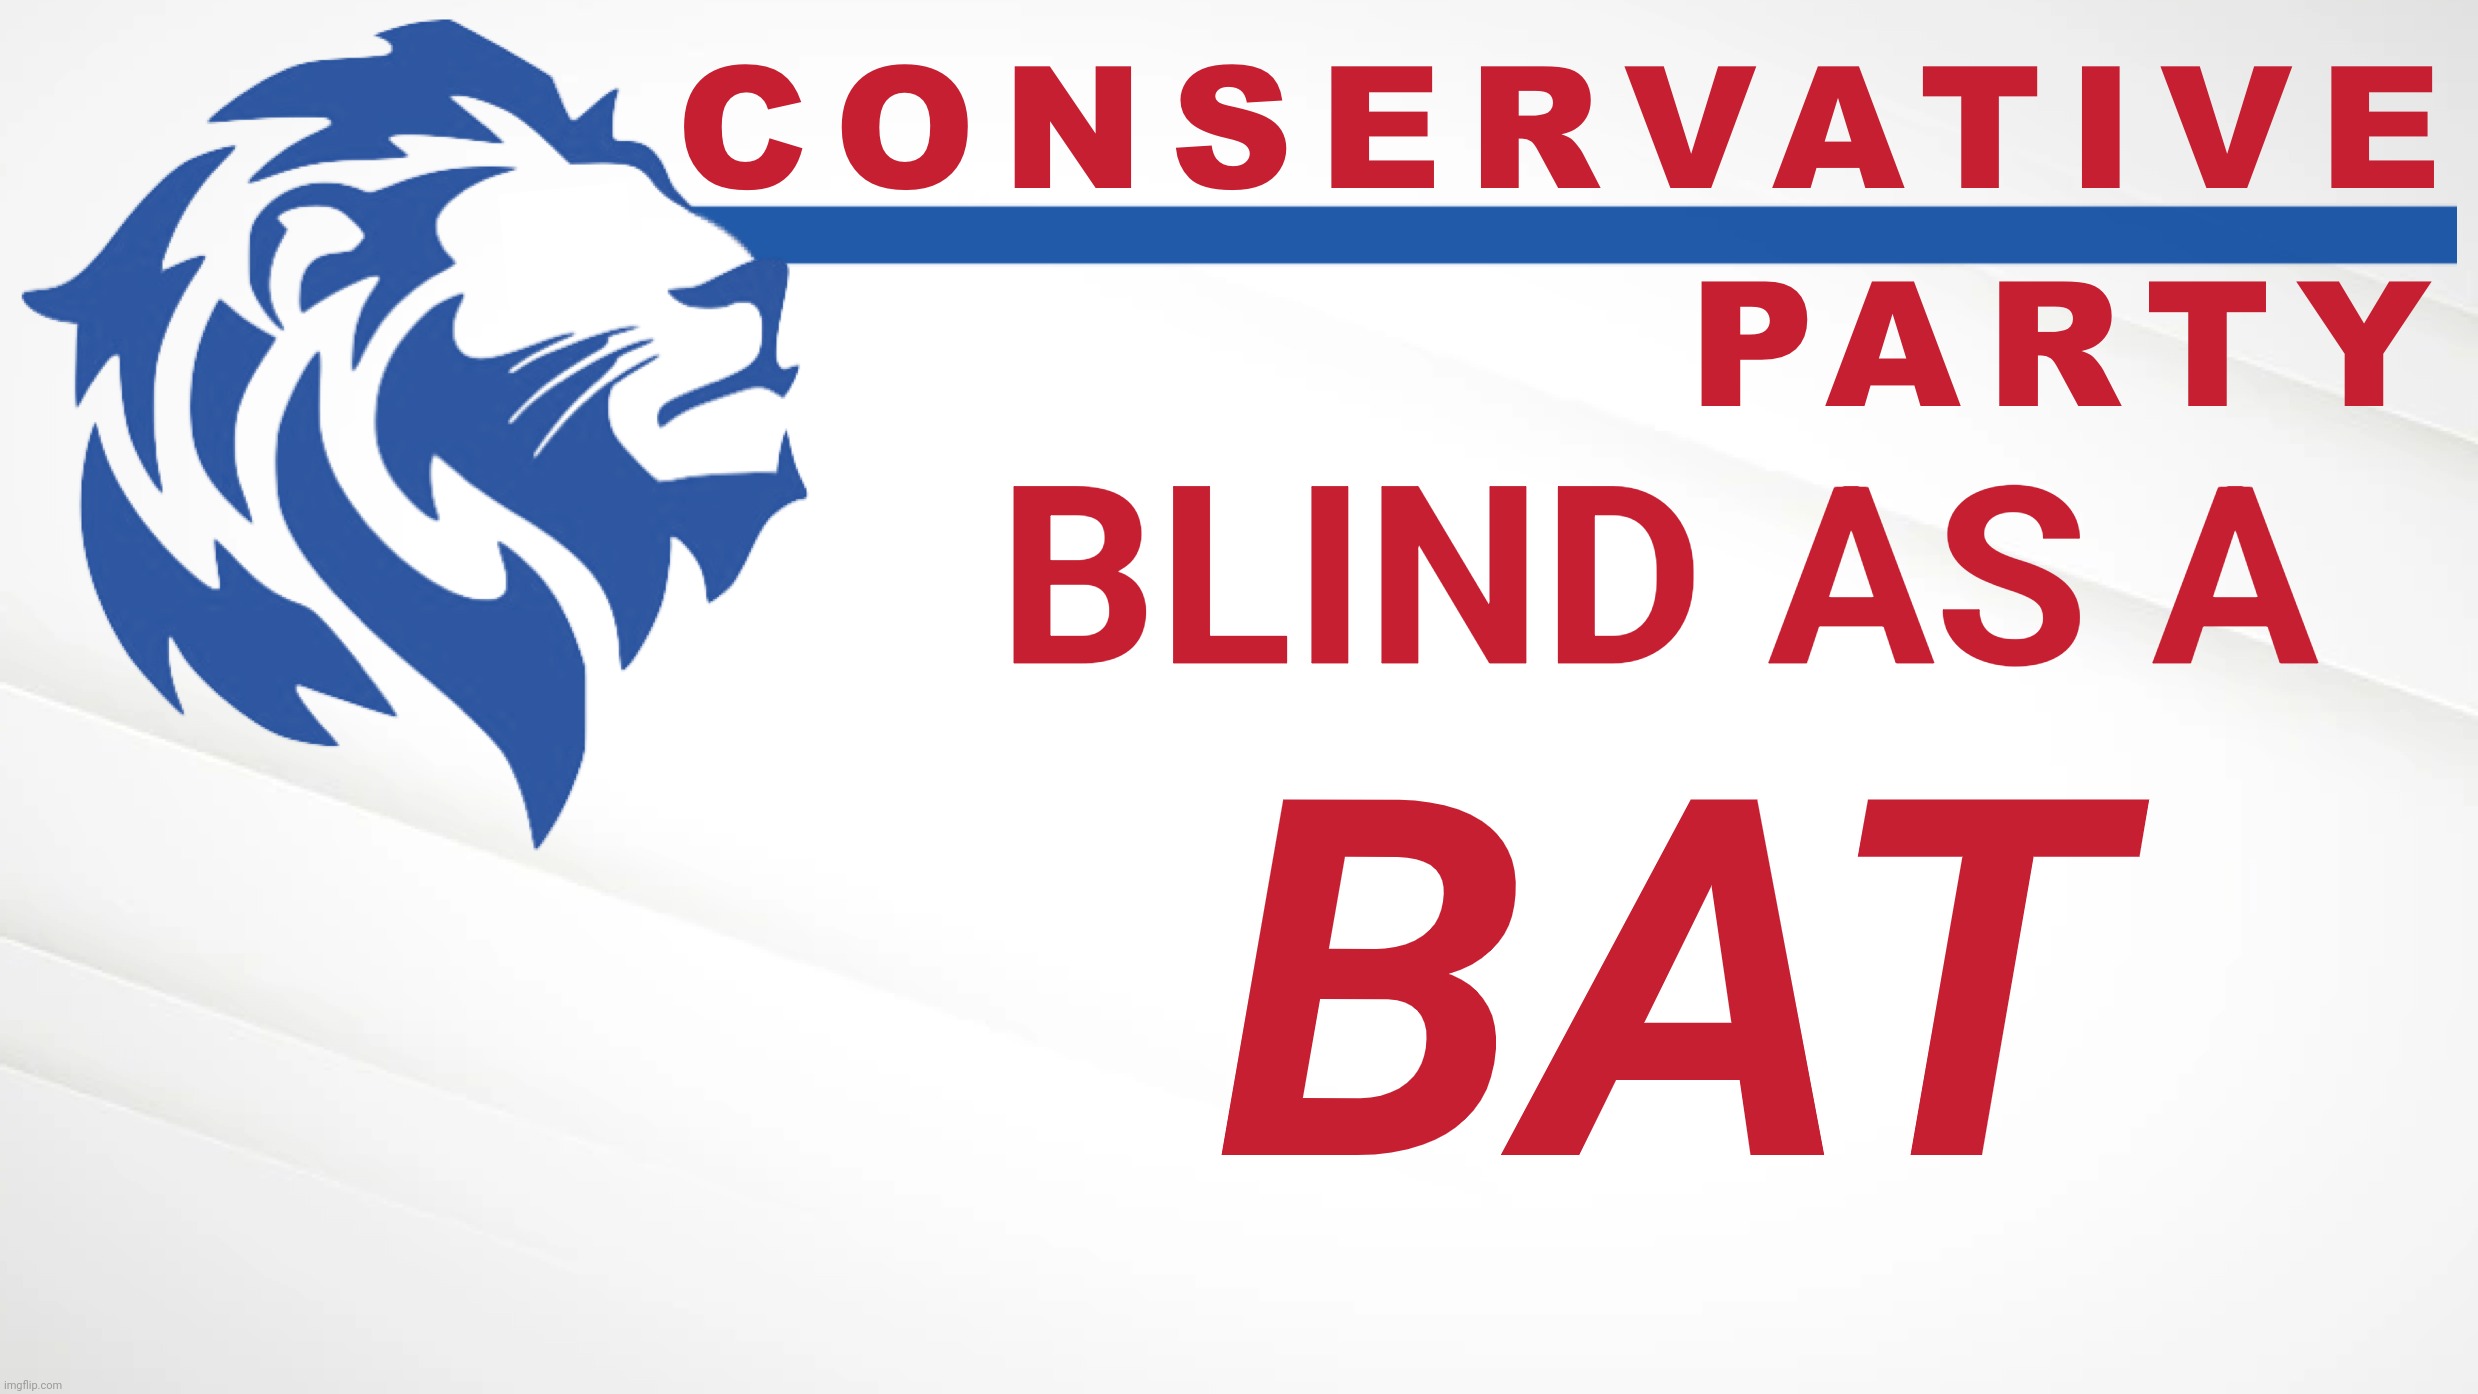 Too much beating Monke | BLIND AS A; BAT | image tagged in conservative party of imgflip,conservative party of imgflip is blind,monkee,common sense party | made w/ Imgflip meme maker